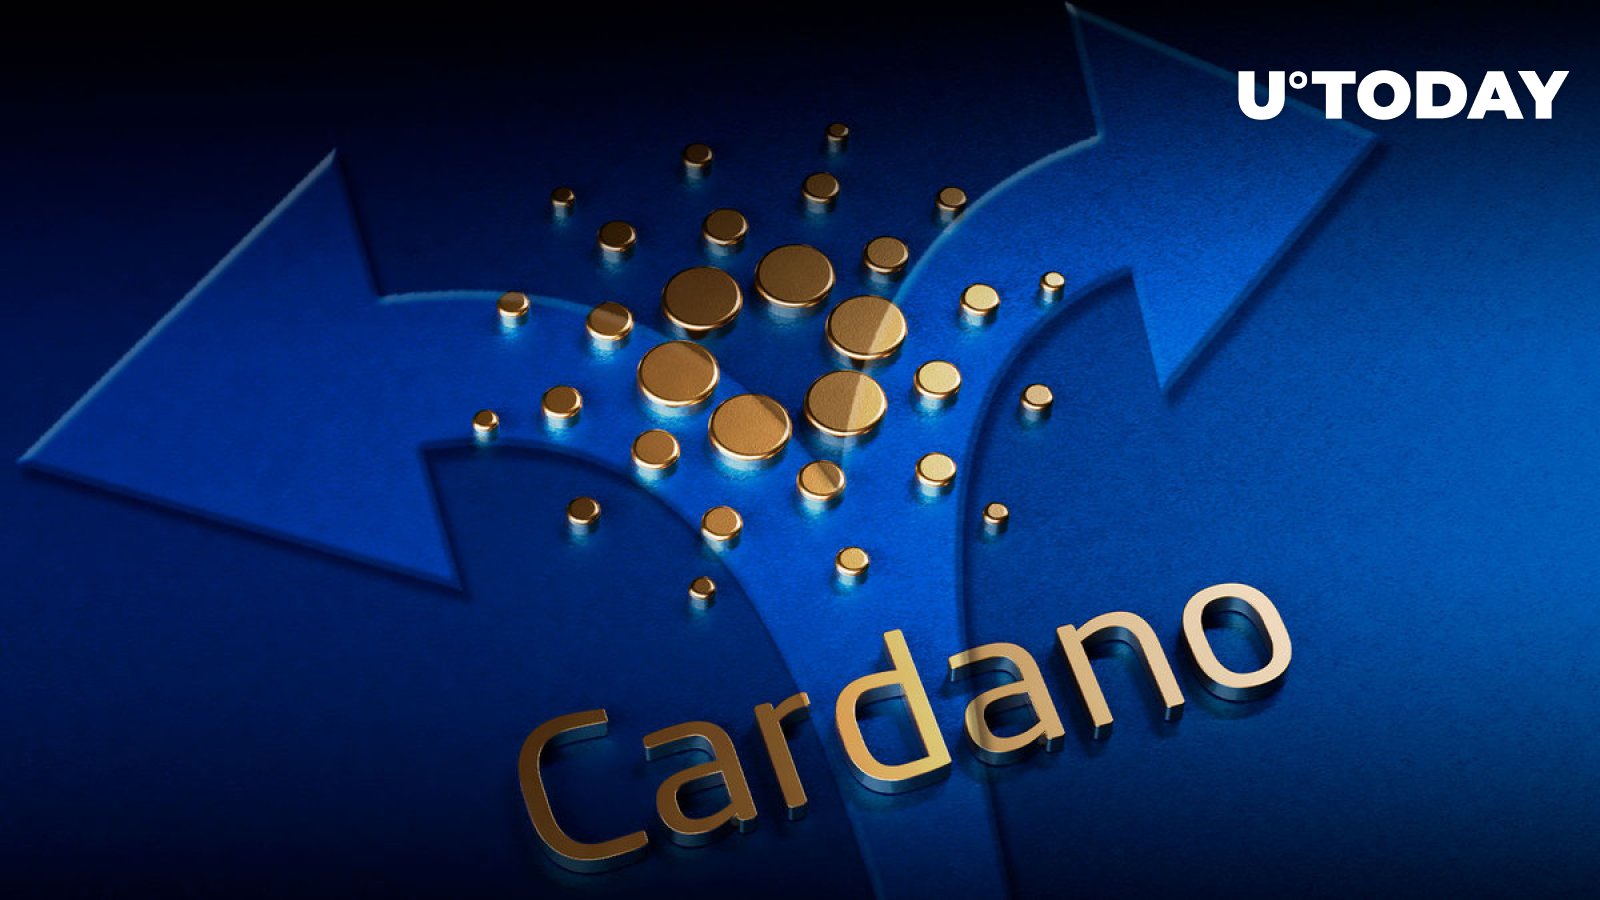 cardano-pools-are-33-ready-for-vasil-hard-fork-here-is-how-much-more-is-missing